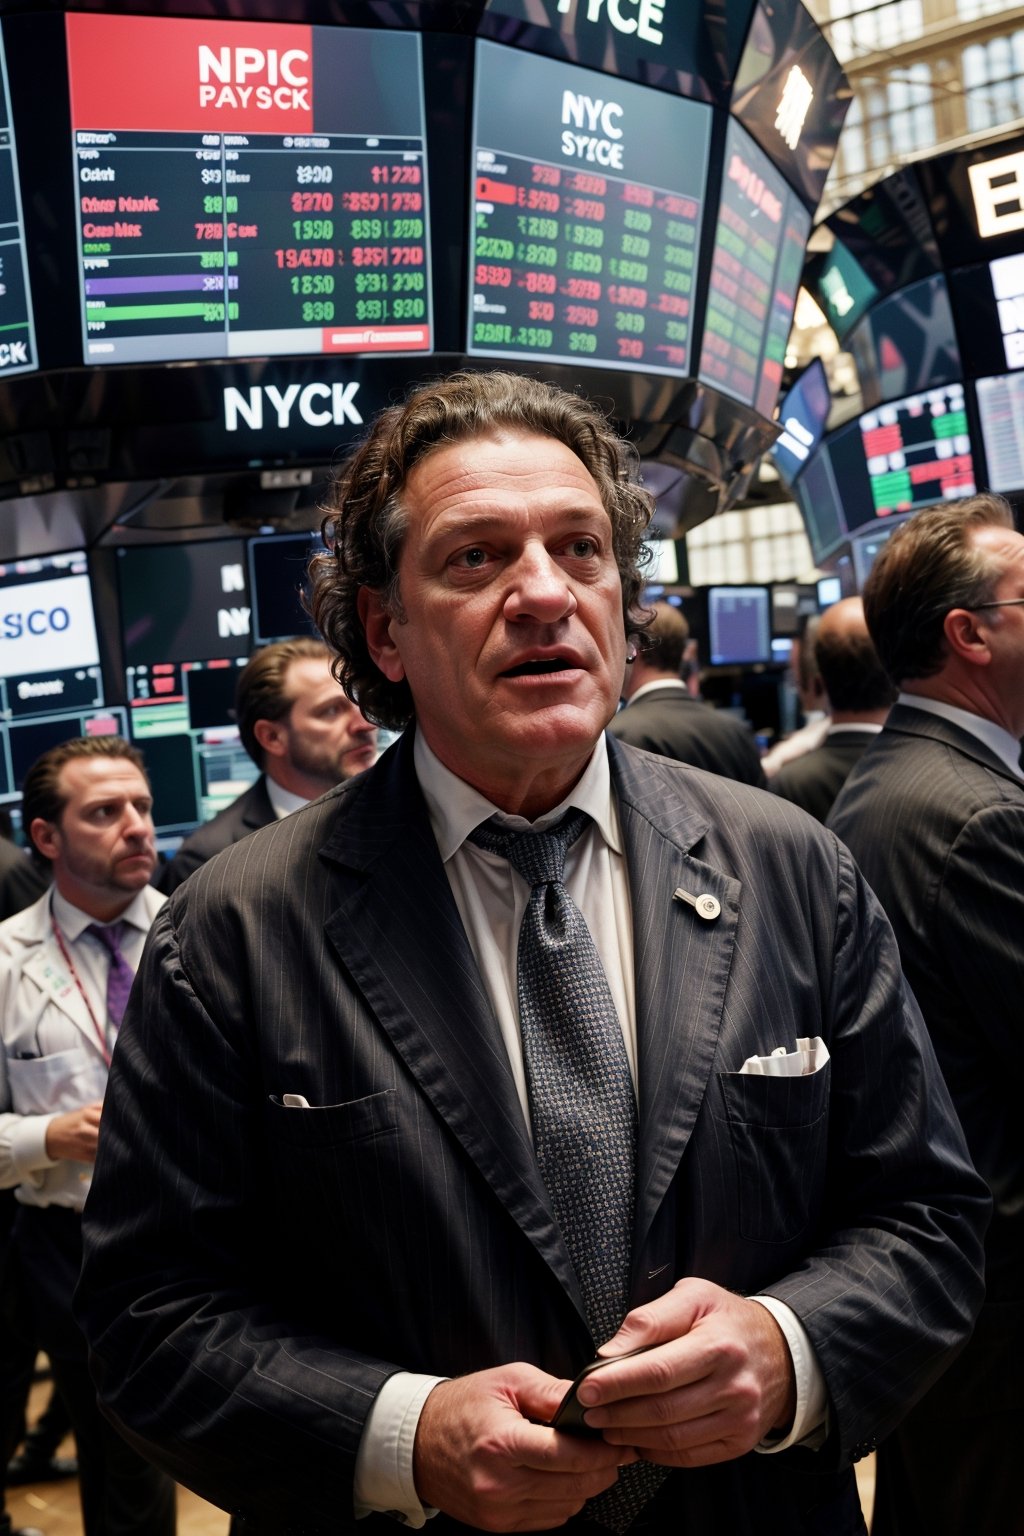 an 8k scene featuring Marco Pierre White at the New York Stock Exchange, surrounded by a bustling crowd of investors, all engaged in calling out prices and trading activities. Marco, amidst the chaos, holds a phone and participates in the flurry of financial transactions. The exchange floor is a whirlwind of activity, capturing the intensity and dynamics of the financial world. 